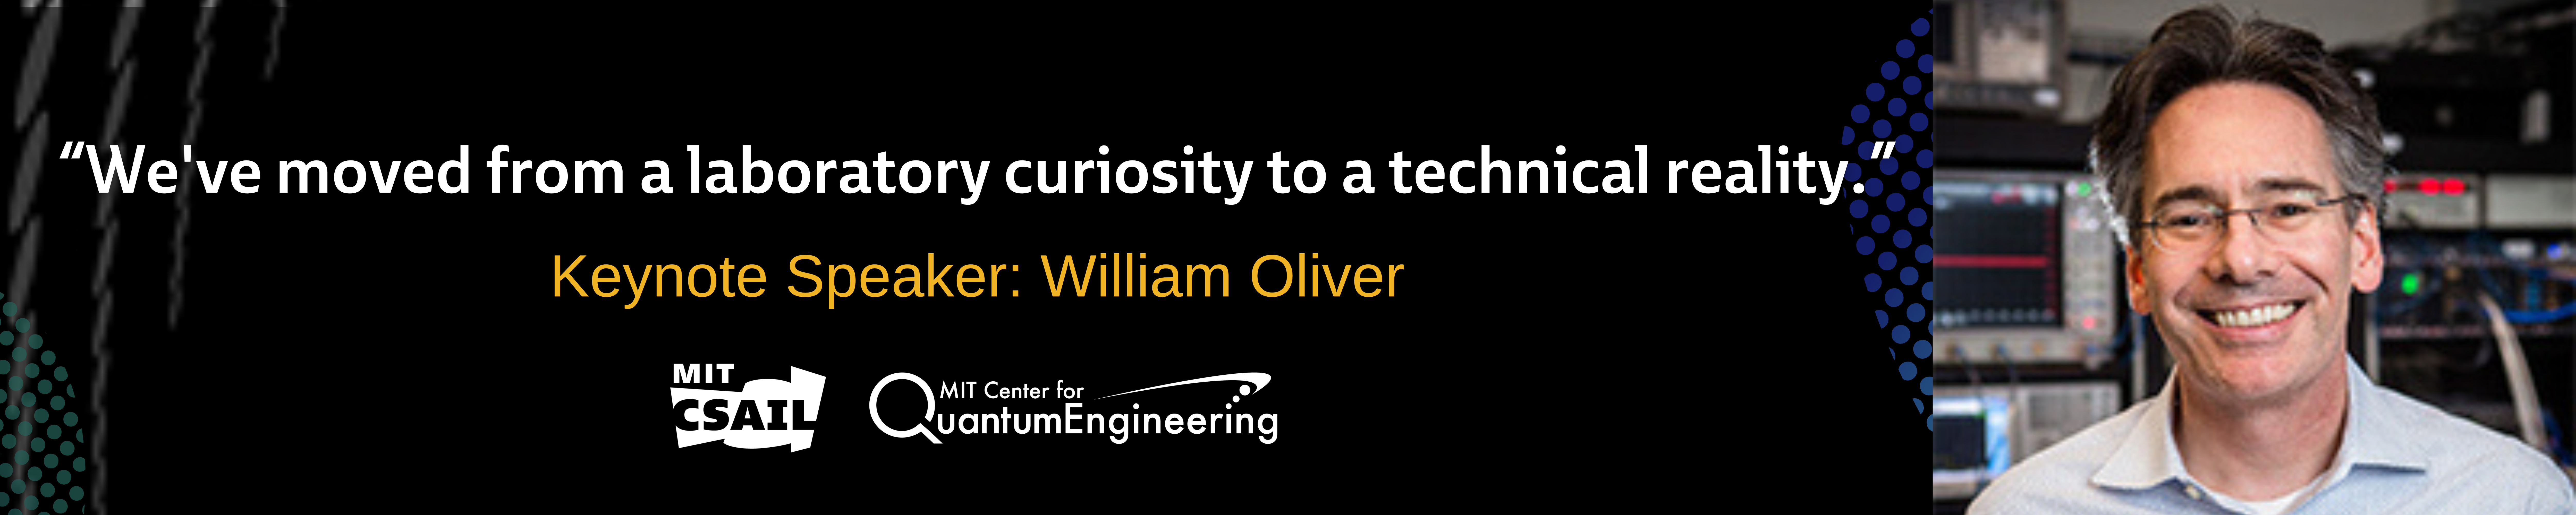 Headshot of William Oliver, with the text “We've moved from a laboratory curiosity to a technical reality.”